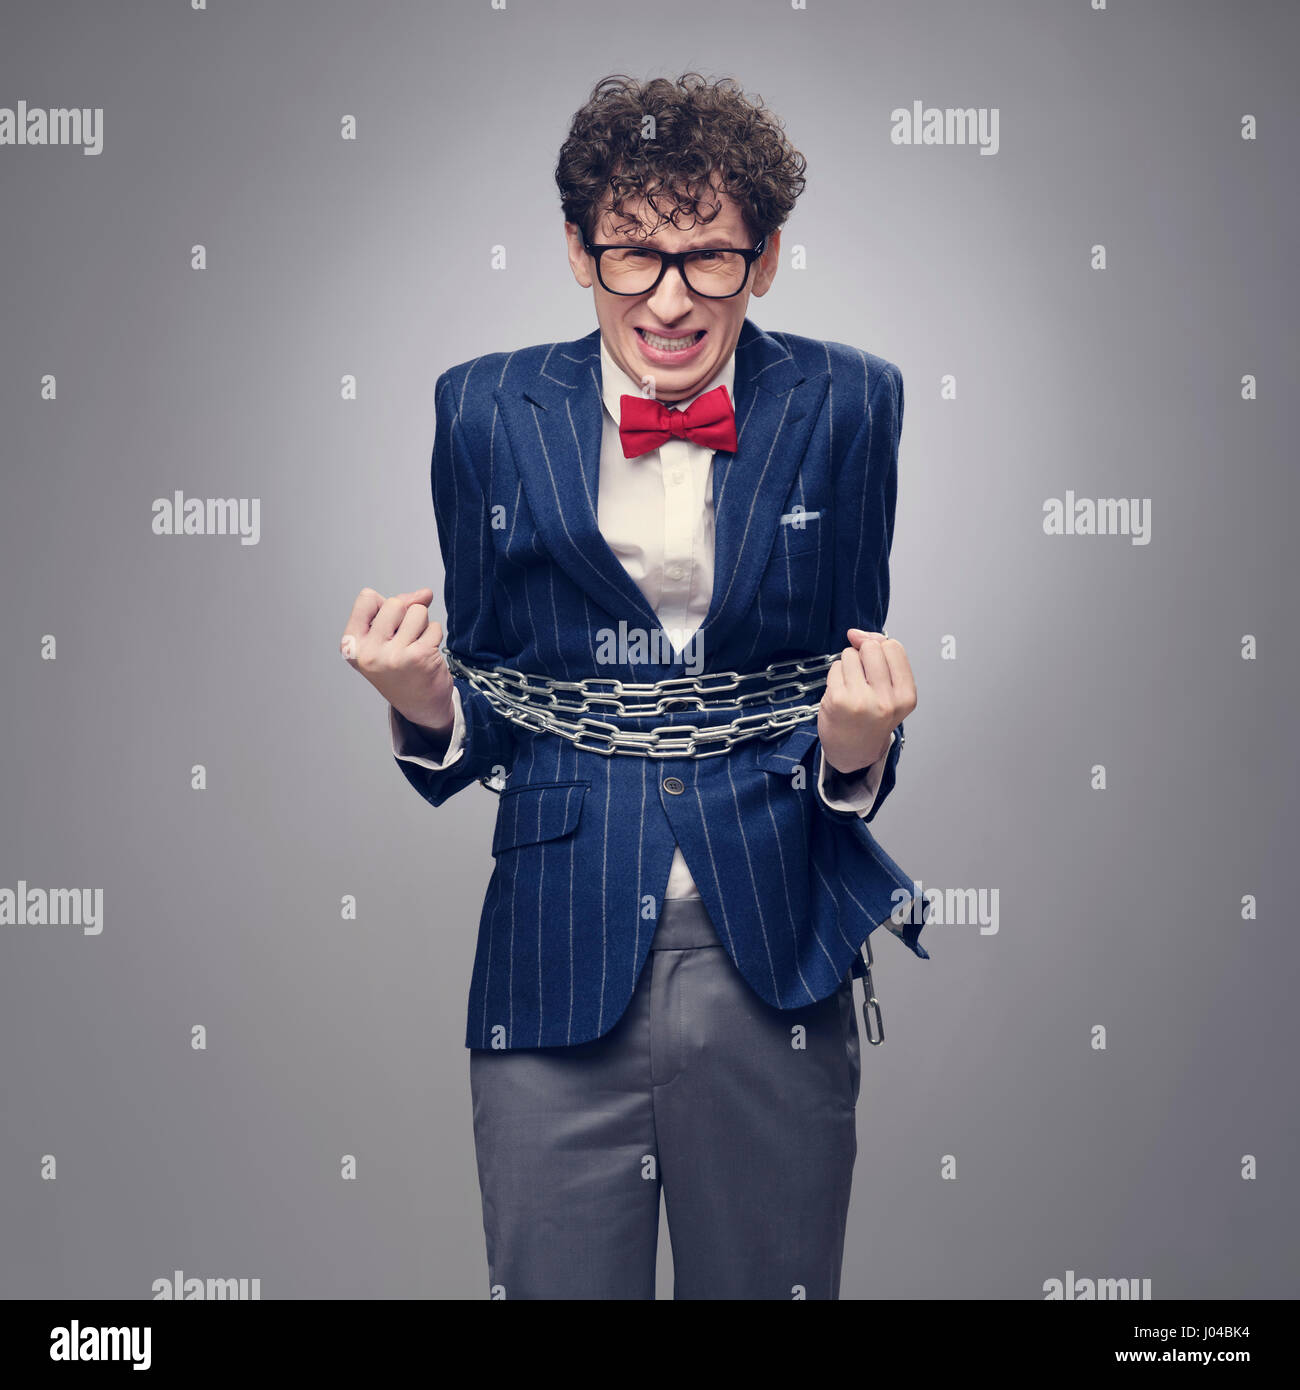 Chained funny business man trying to free himself Stock Photo